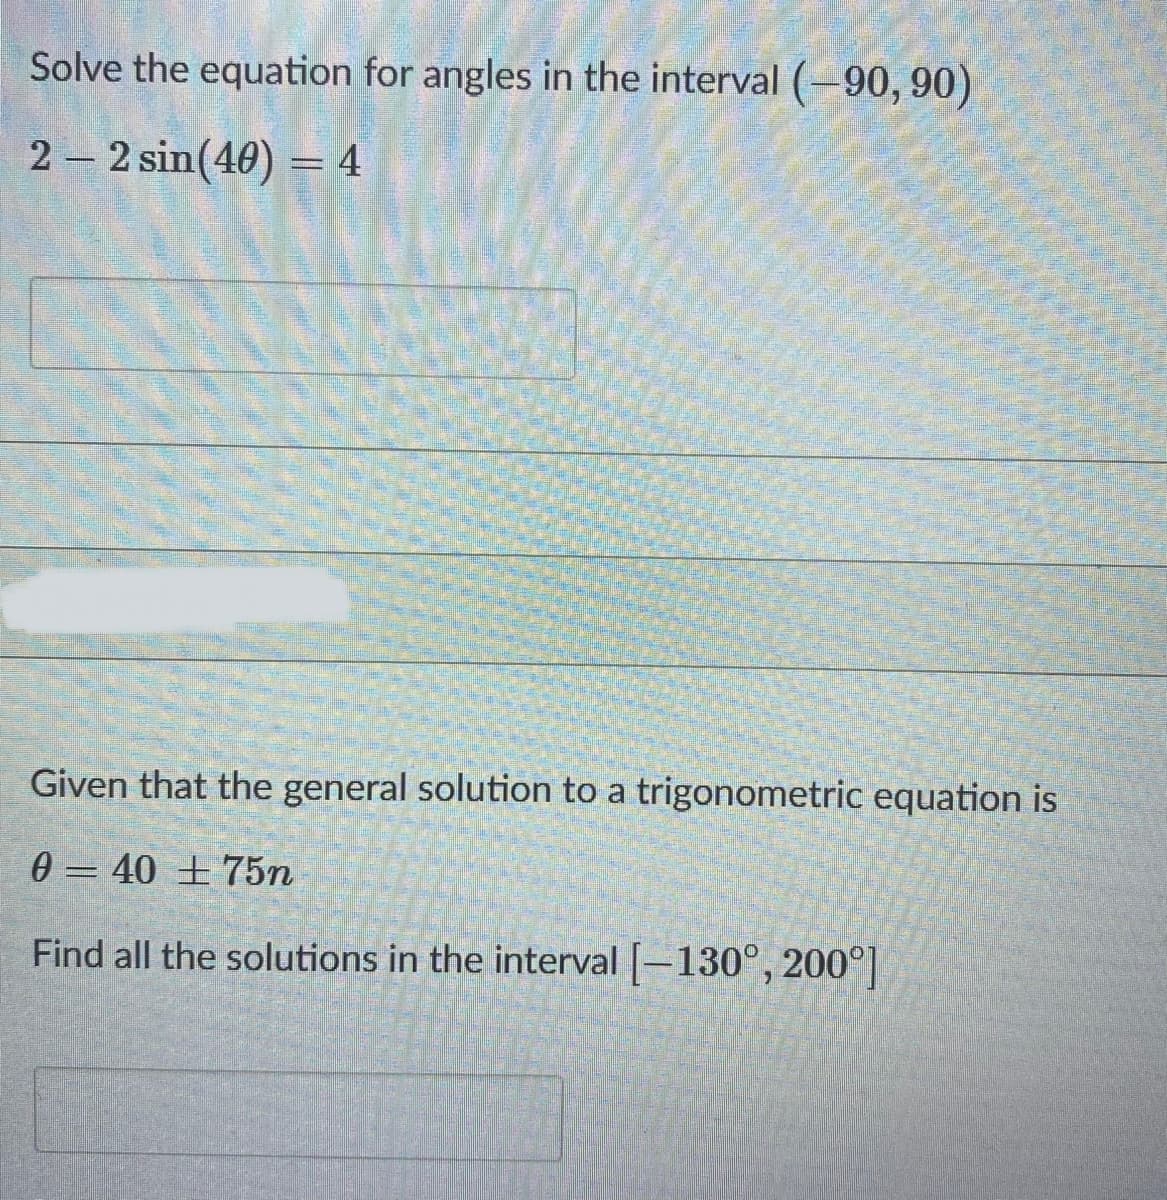 Solve the equation for angles in the interval (-90, 90)
2 – 2 sin(40) = 4
Given that the general solution to a trigonometric equation is
0 = 40 ± 75n
Find all the solutions in the interval [-130°, 200°]
